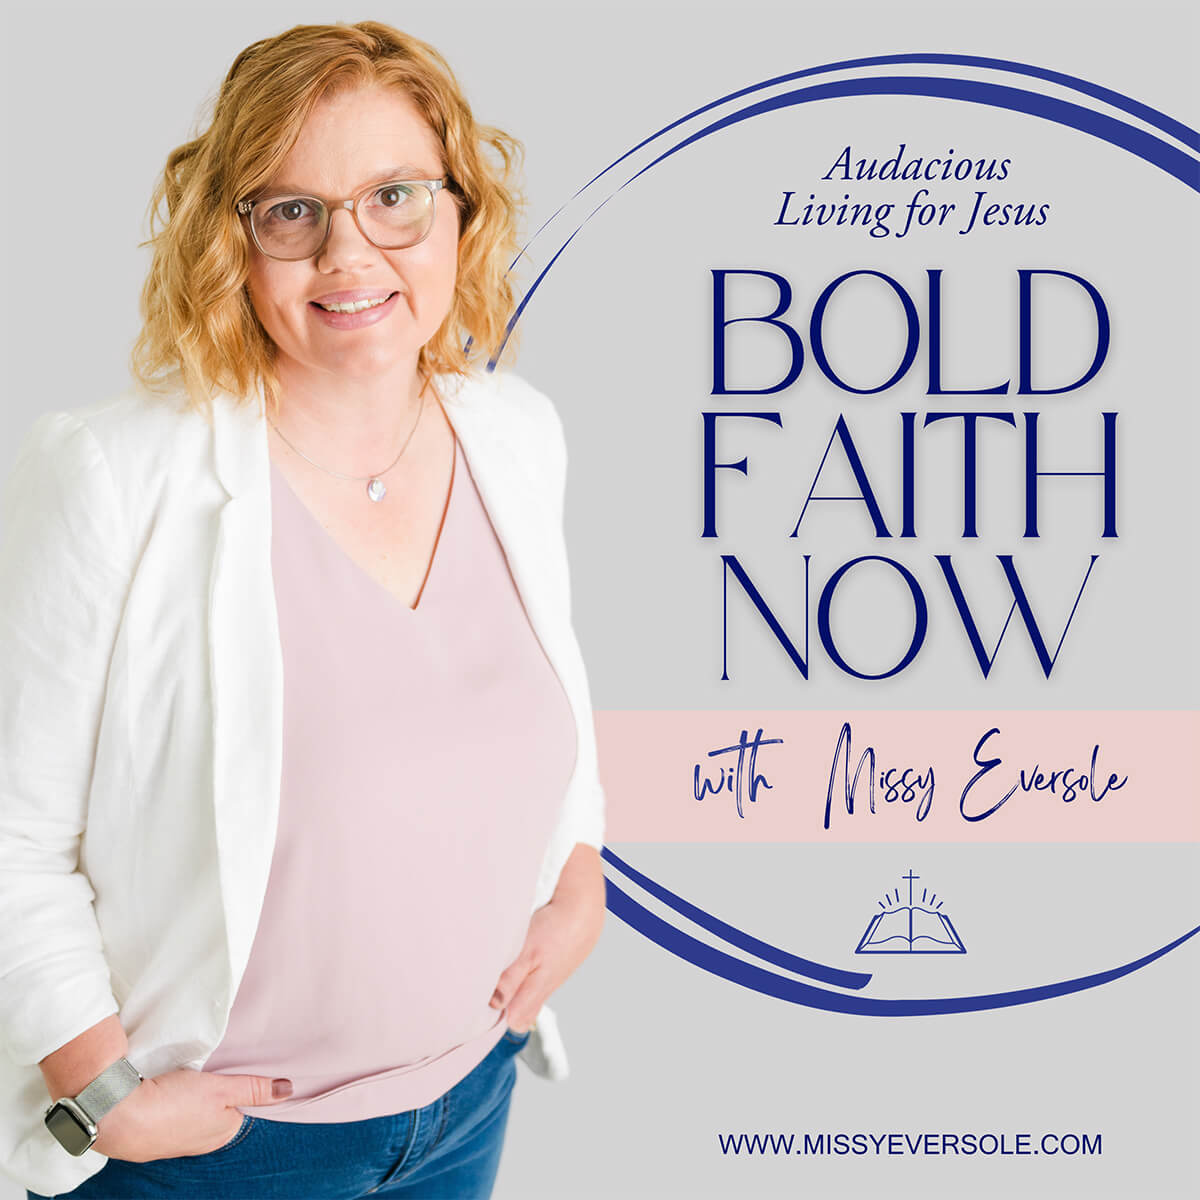 Audacious Living for Jesus - Bold Faith Now with Missy Eversole